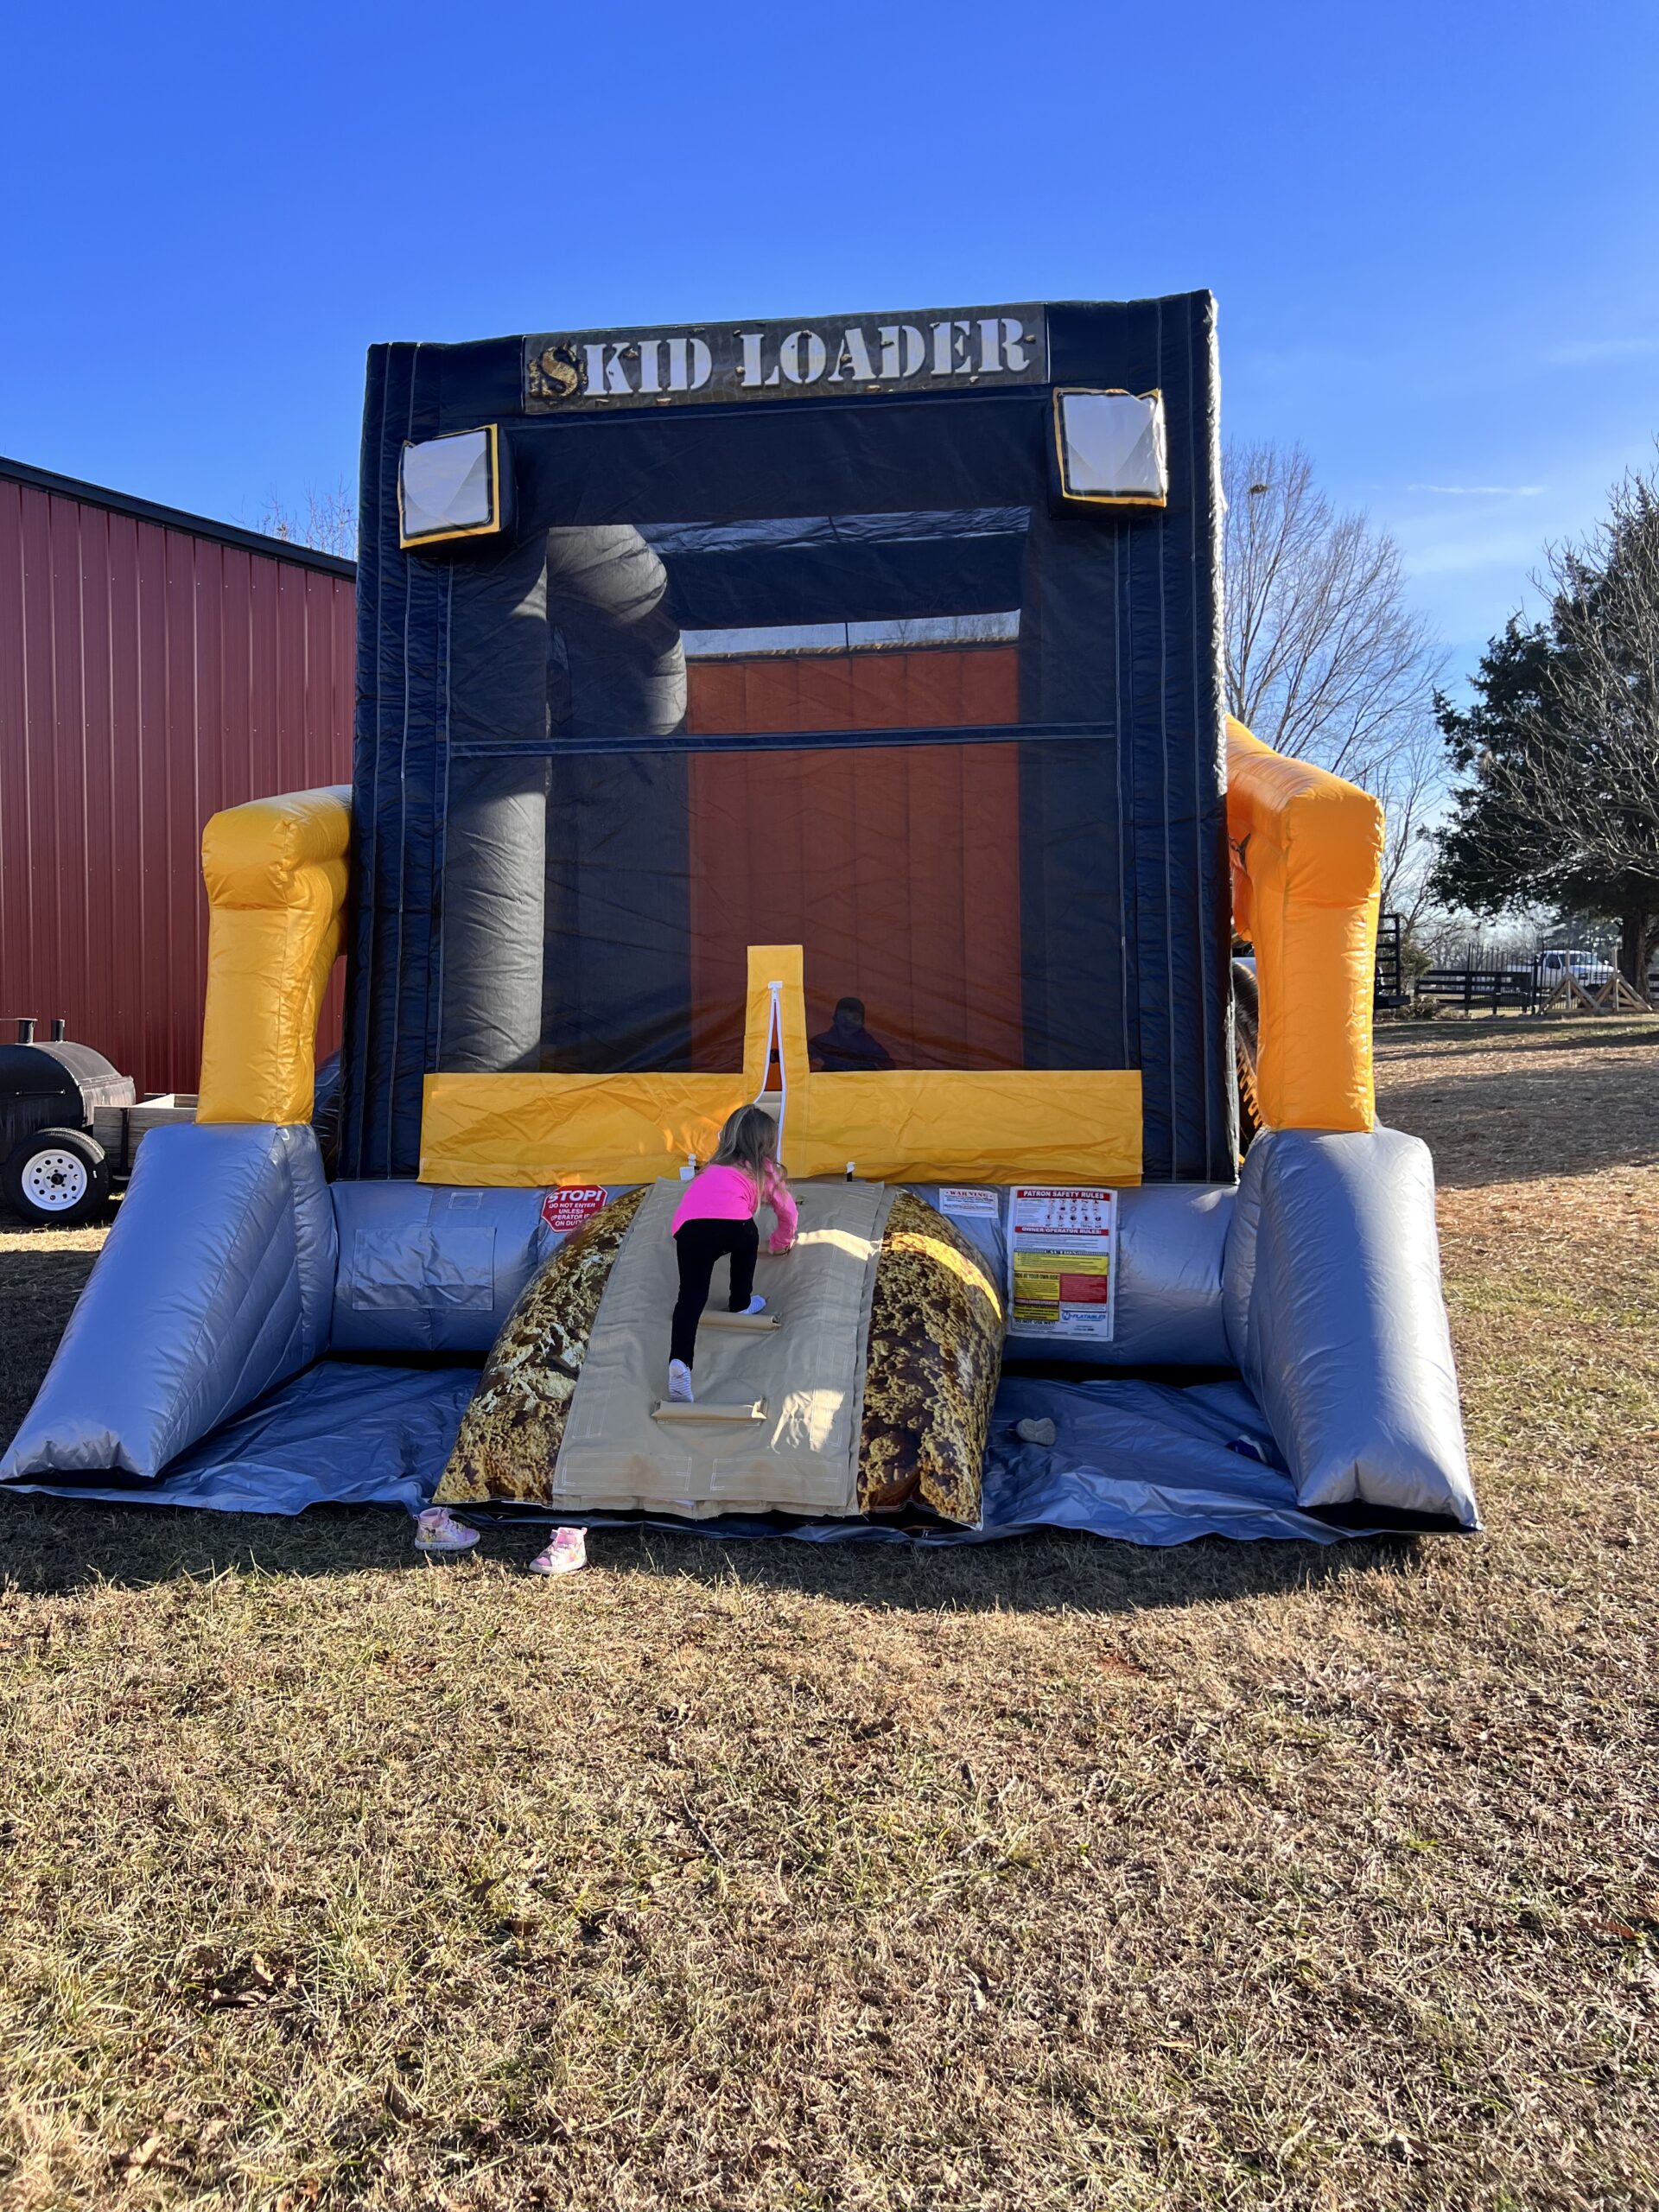 Skid loader inflatable bounce house rental for birthday parties.